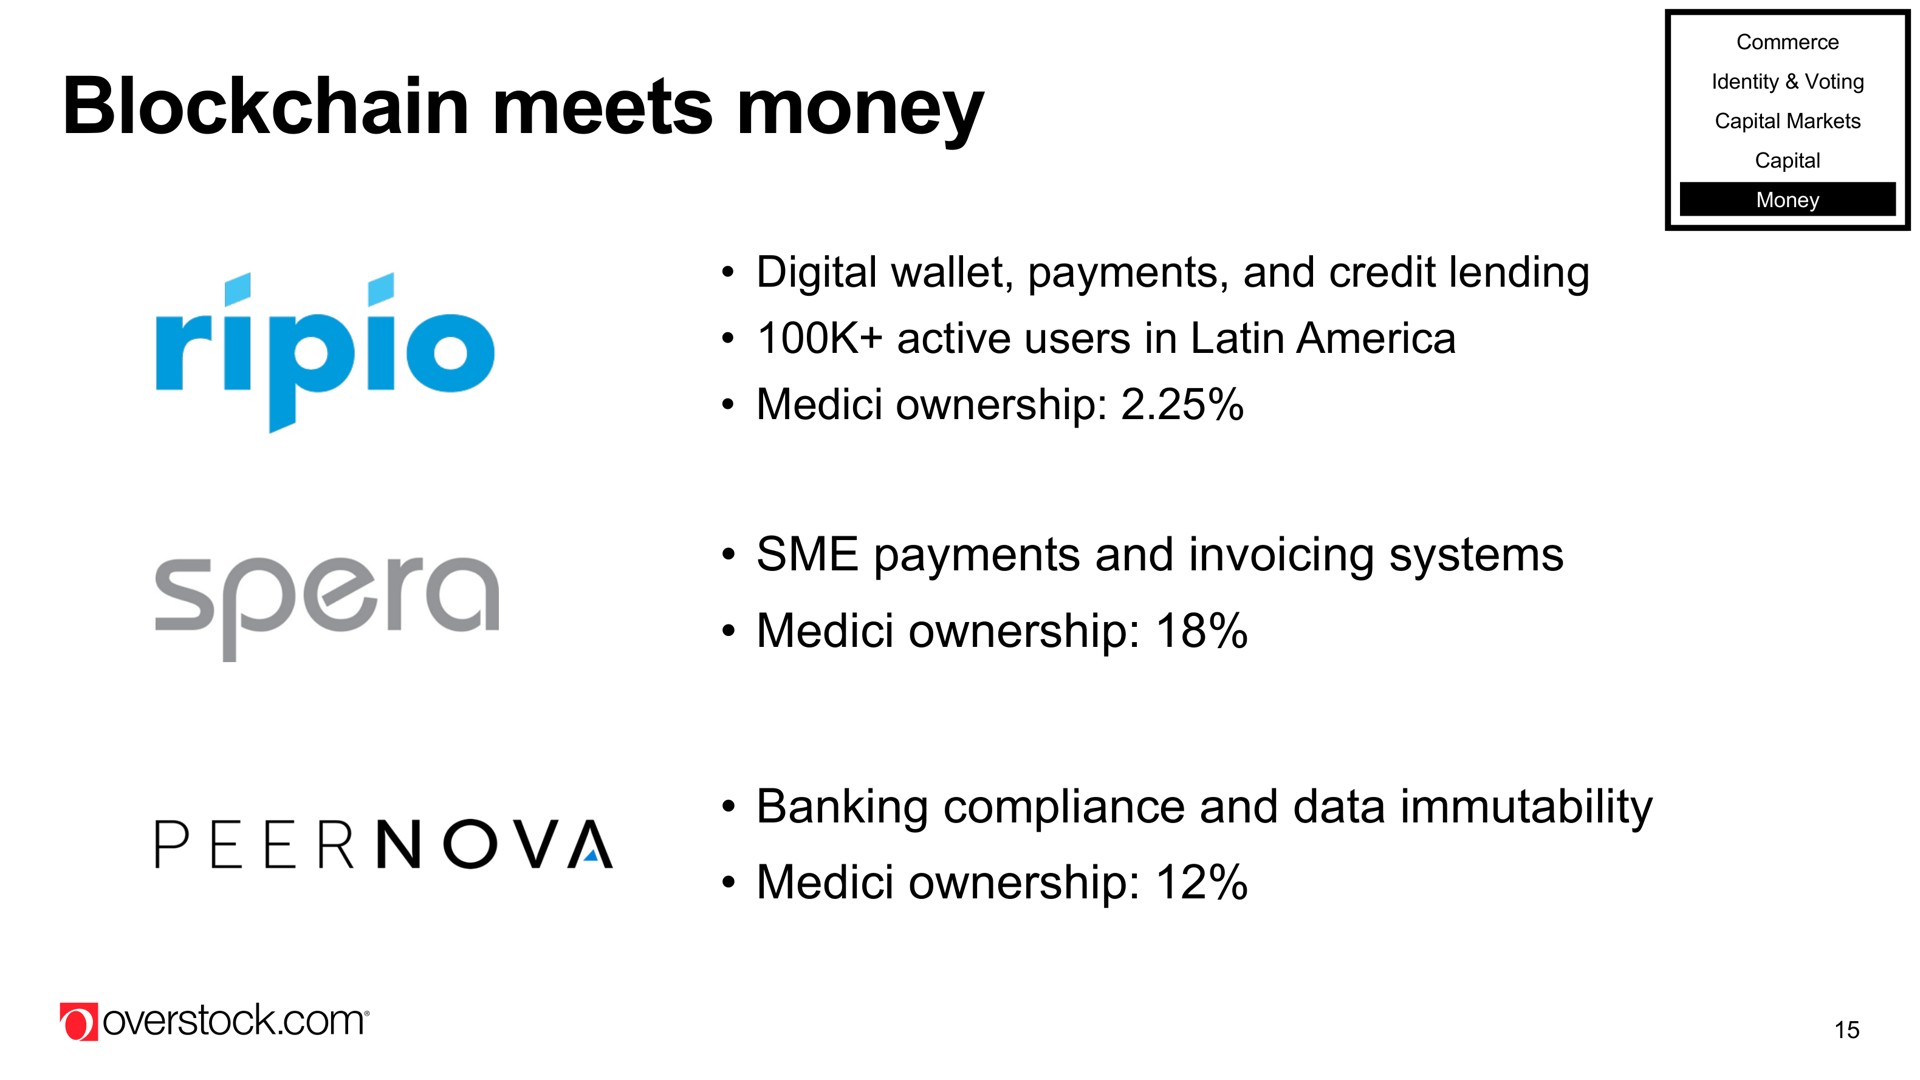 meets money digital wallet payments and credit lending active users in ownership payments and invoicing systems ownership banking compliance and data immutability ownership | Overstock